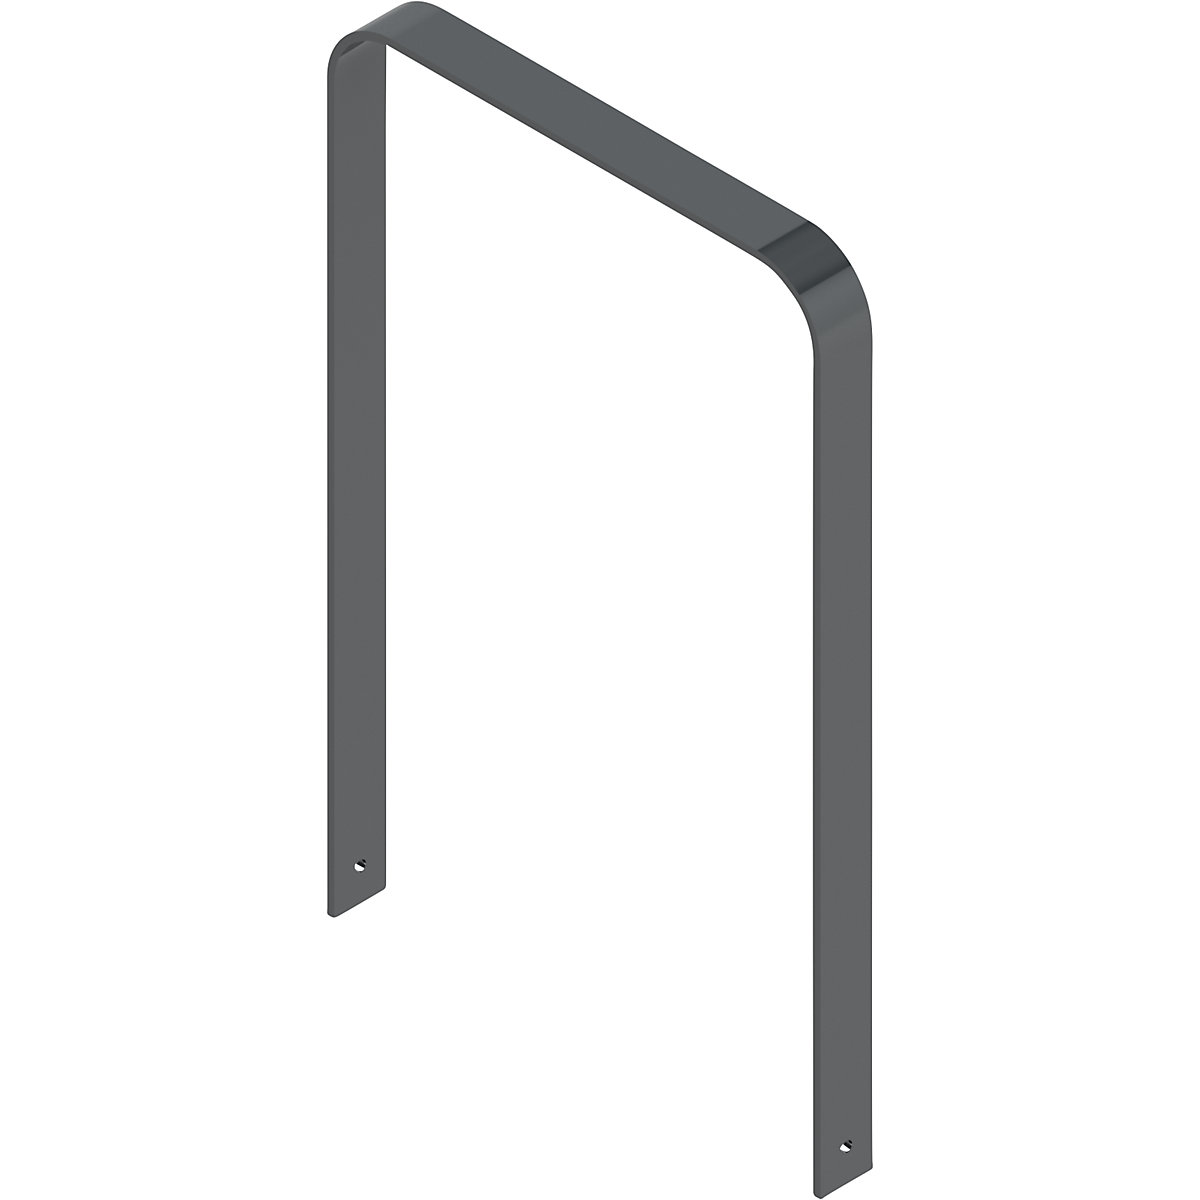 Bicycle parking rail, hot dip galvanised, iron glimmer, curving model, WxD 750 x 80 mm-1